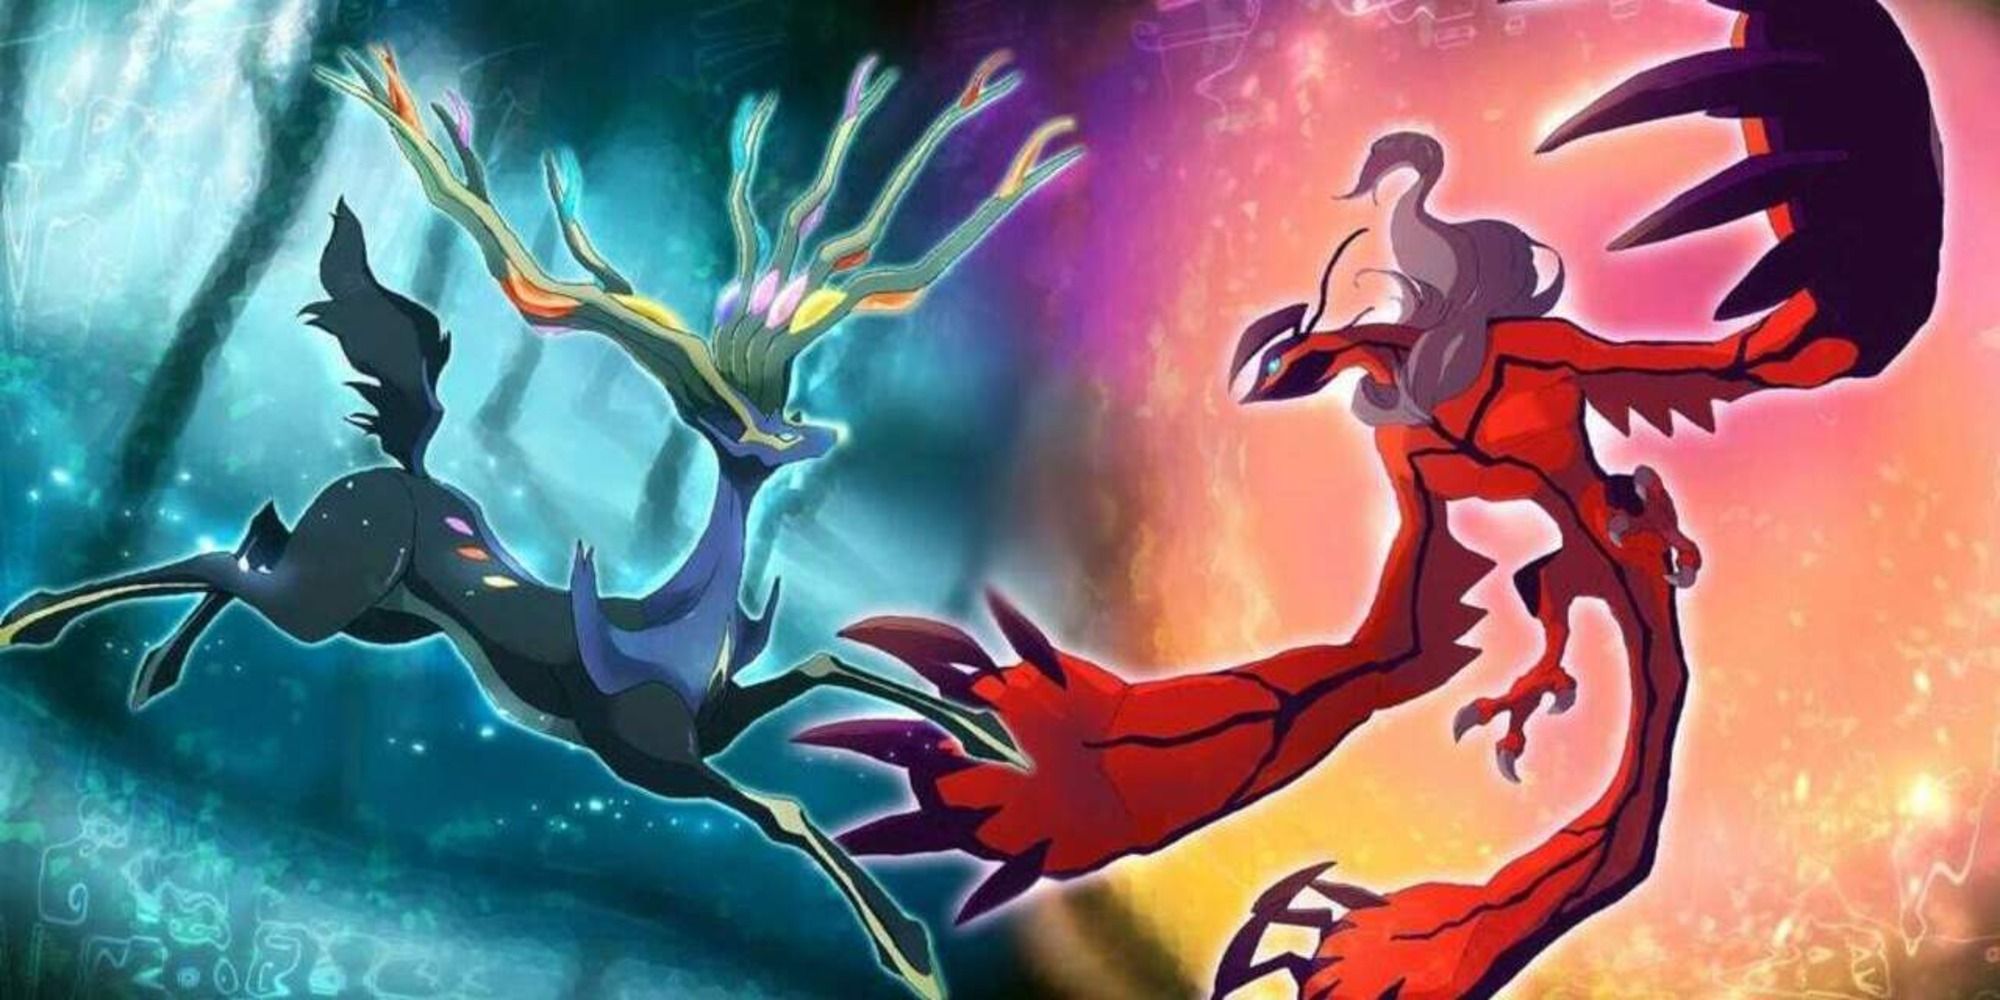 Official art of Pokemon X and Y's legendaries, Xerneas and Yveltal 